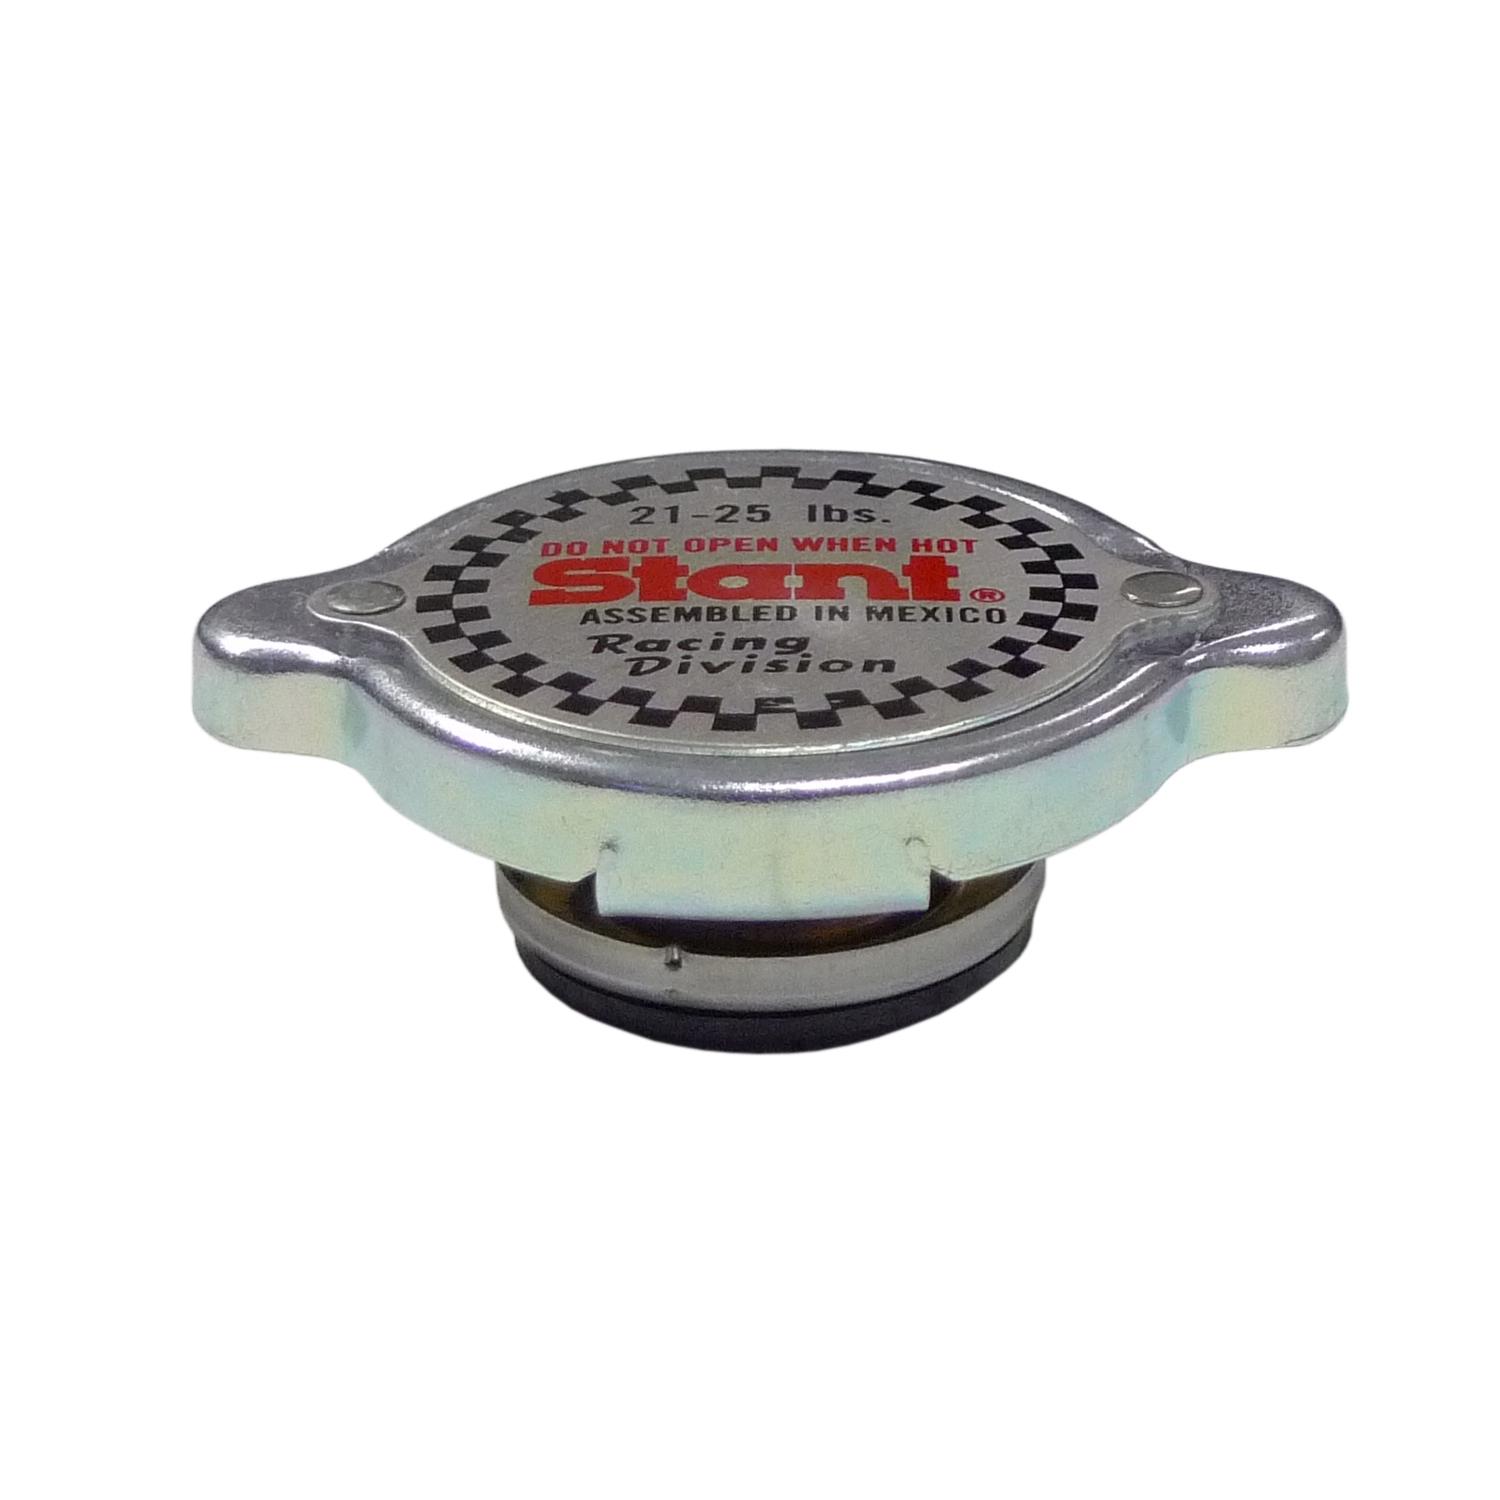 Stant Radiator Cap rated 2125 PSI 10372 from Merlin Motorsport